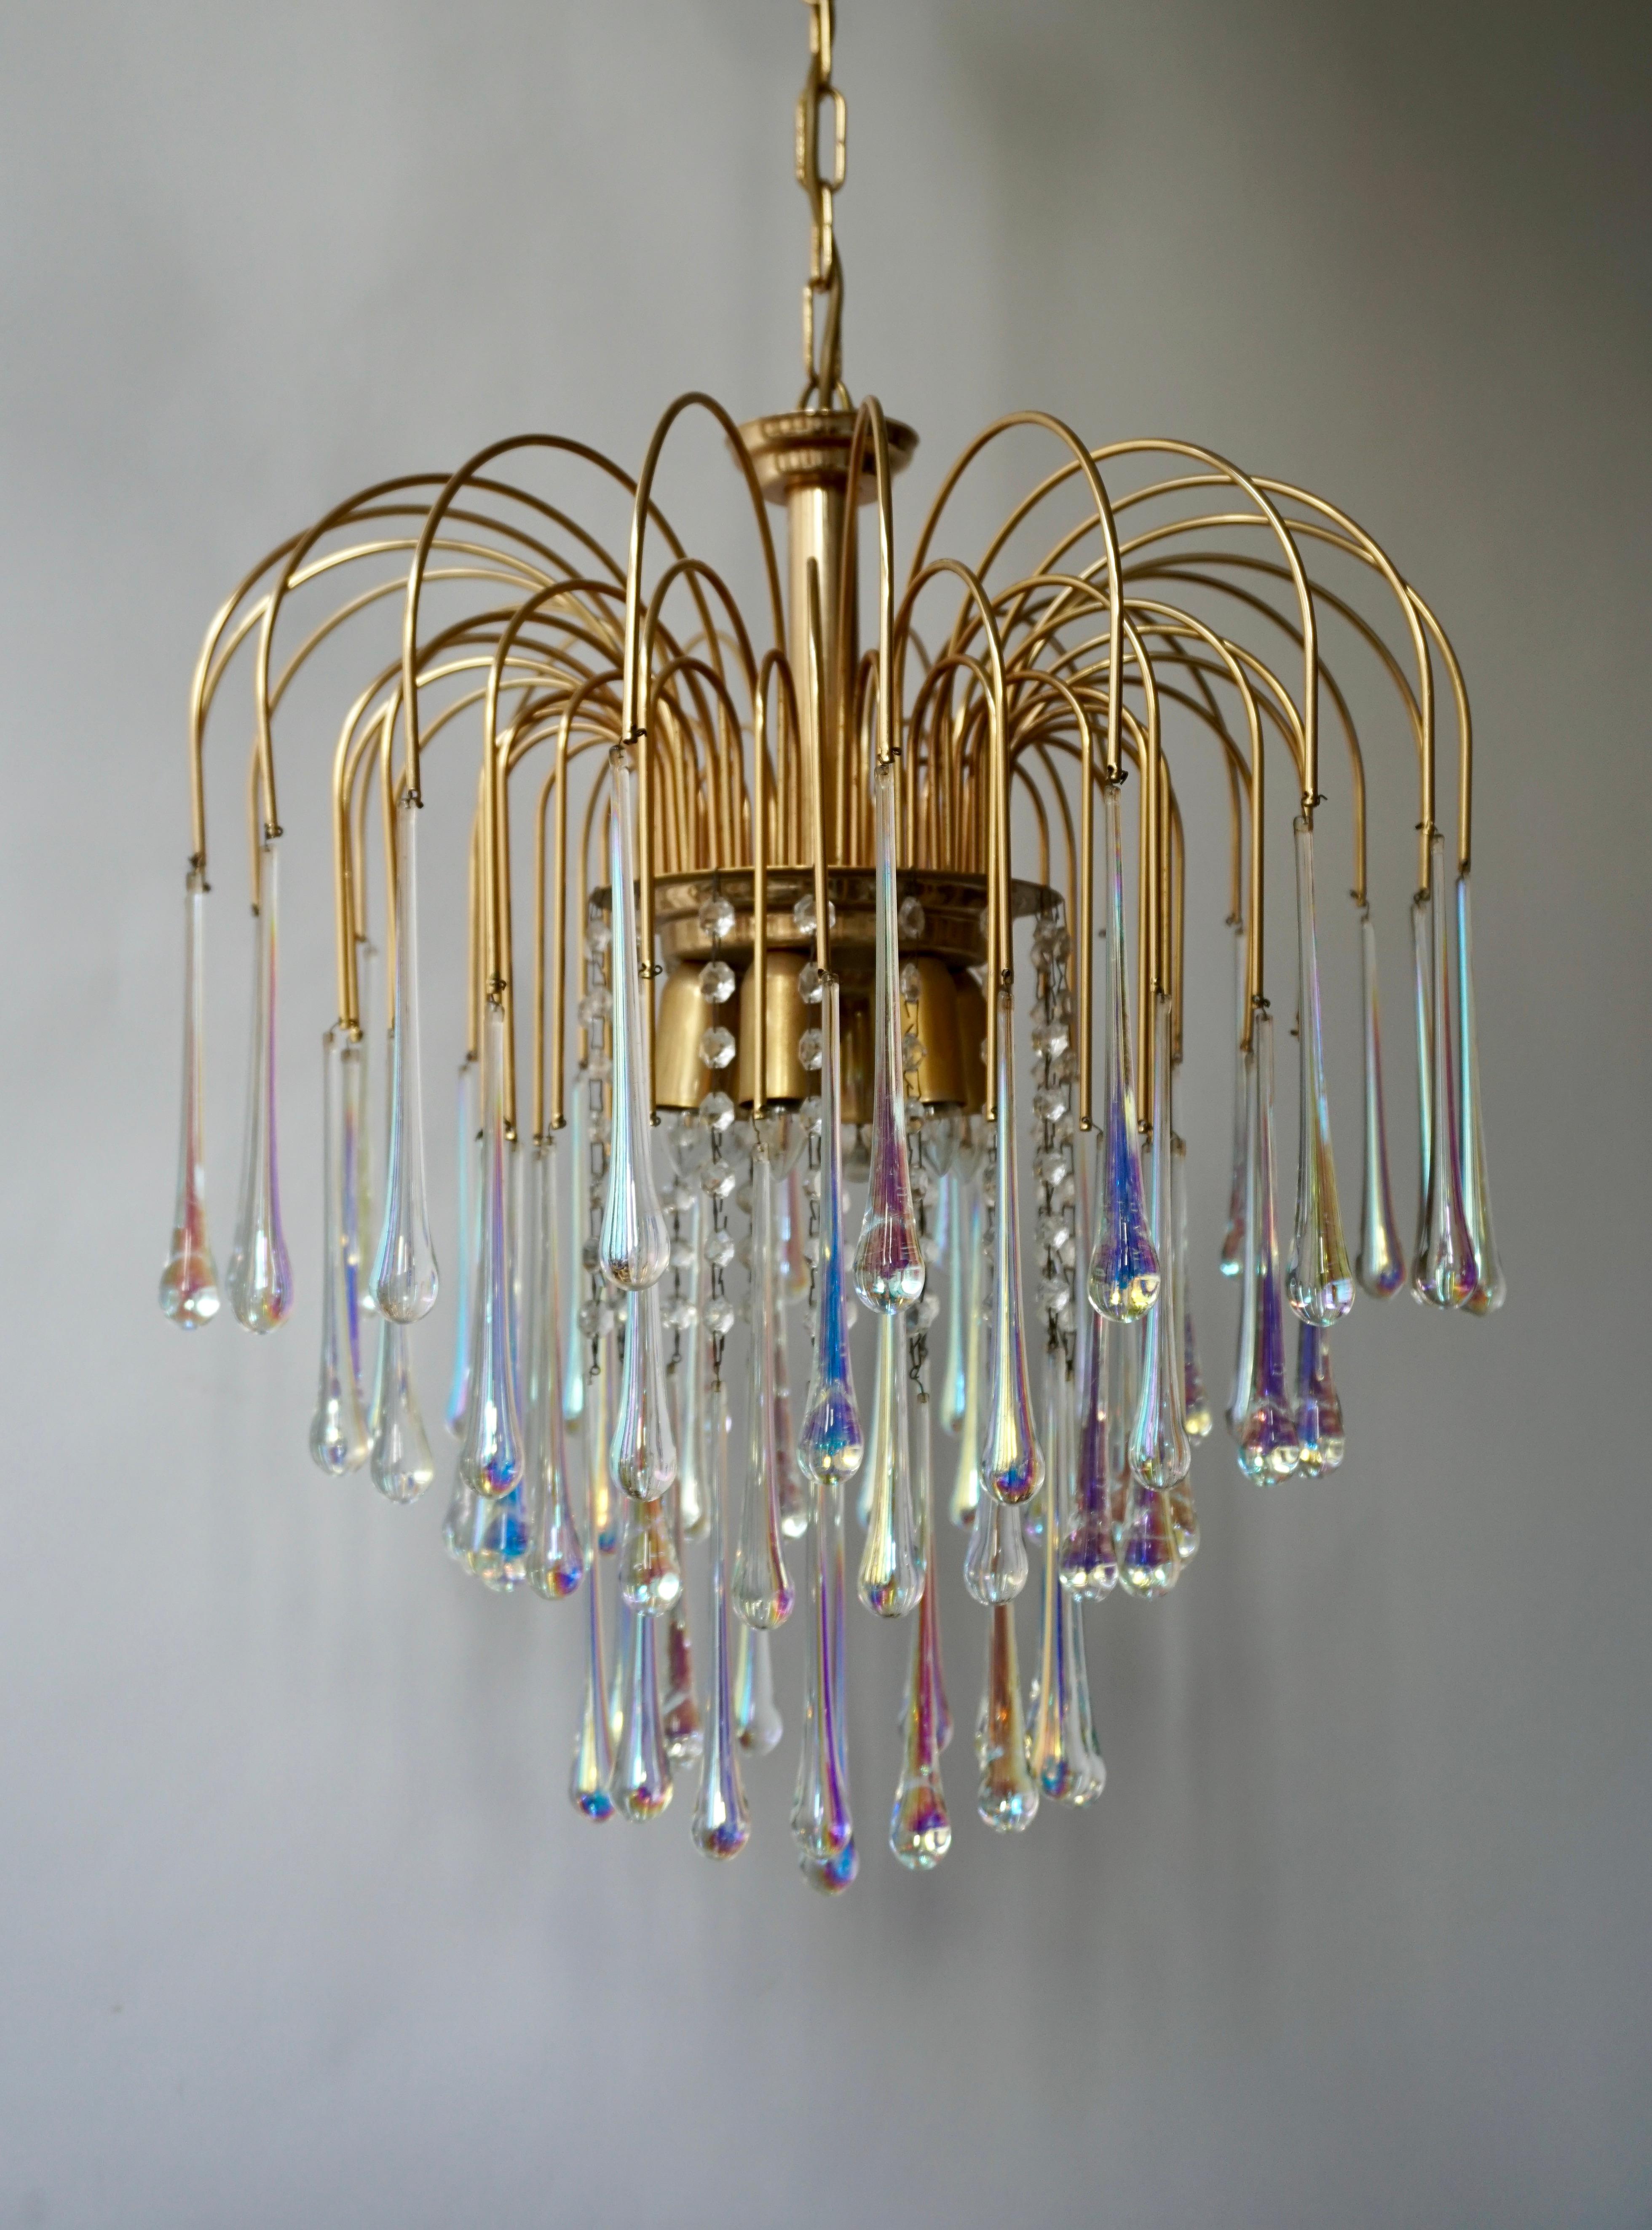 Italian Murano teardrop chandelier, made in the 1950s. Features a brass frame with clear iridescent Murano teardrop crystals.
Measures: Diameter 50 cm.
Height fixture 58 cm.
Total height including the chain and canopy 115 cm.
Six E14 bulbs.